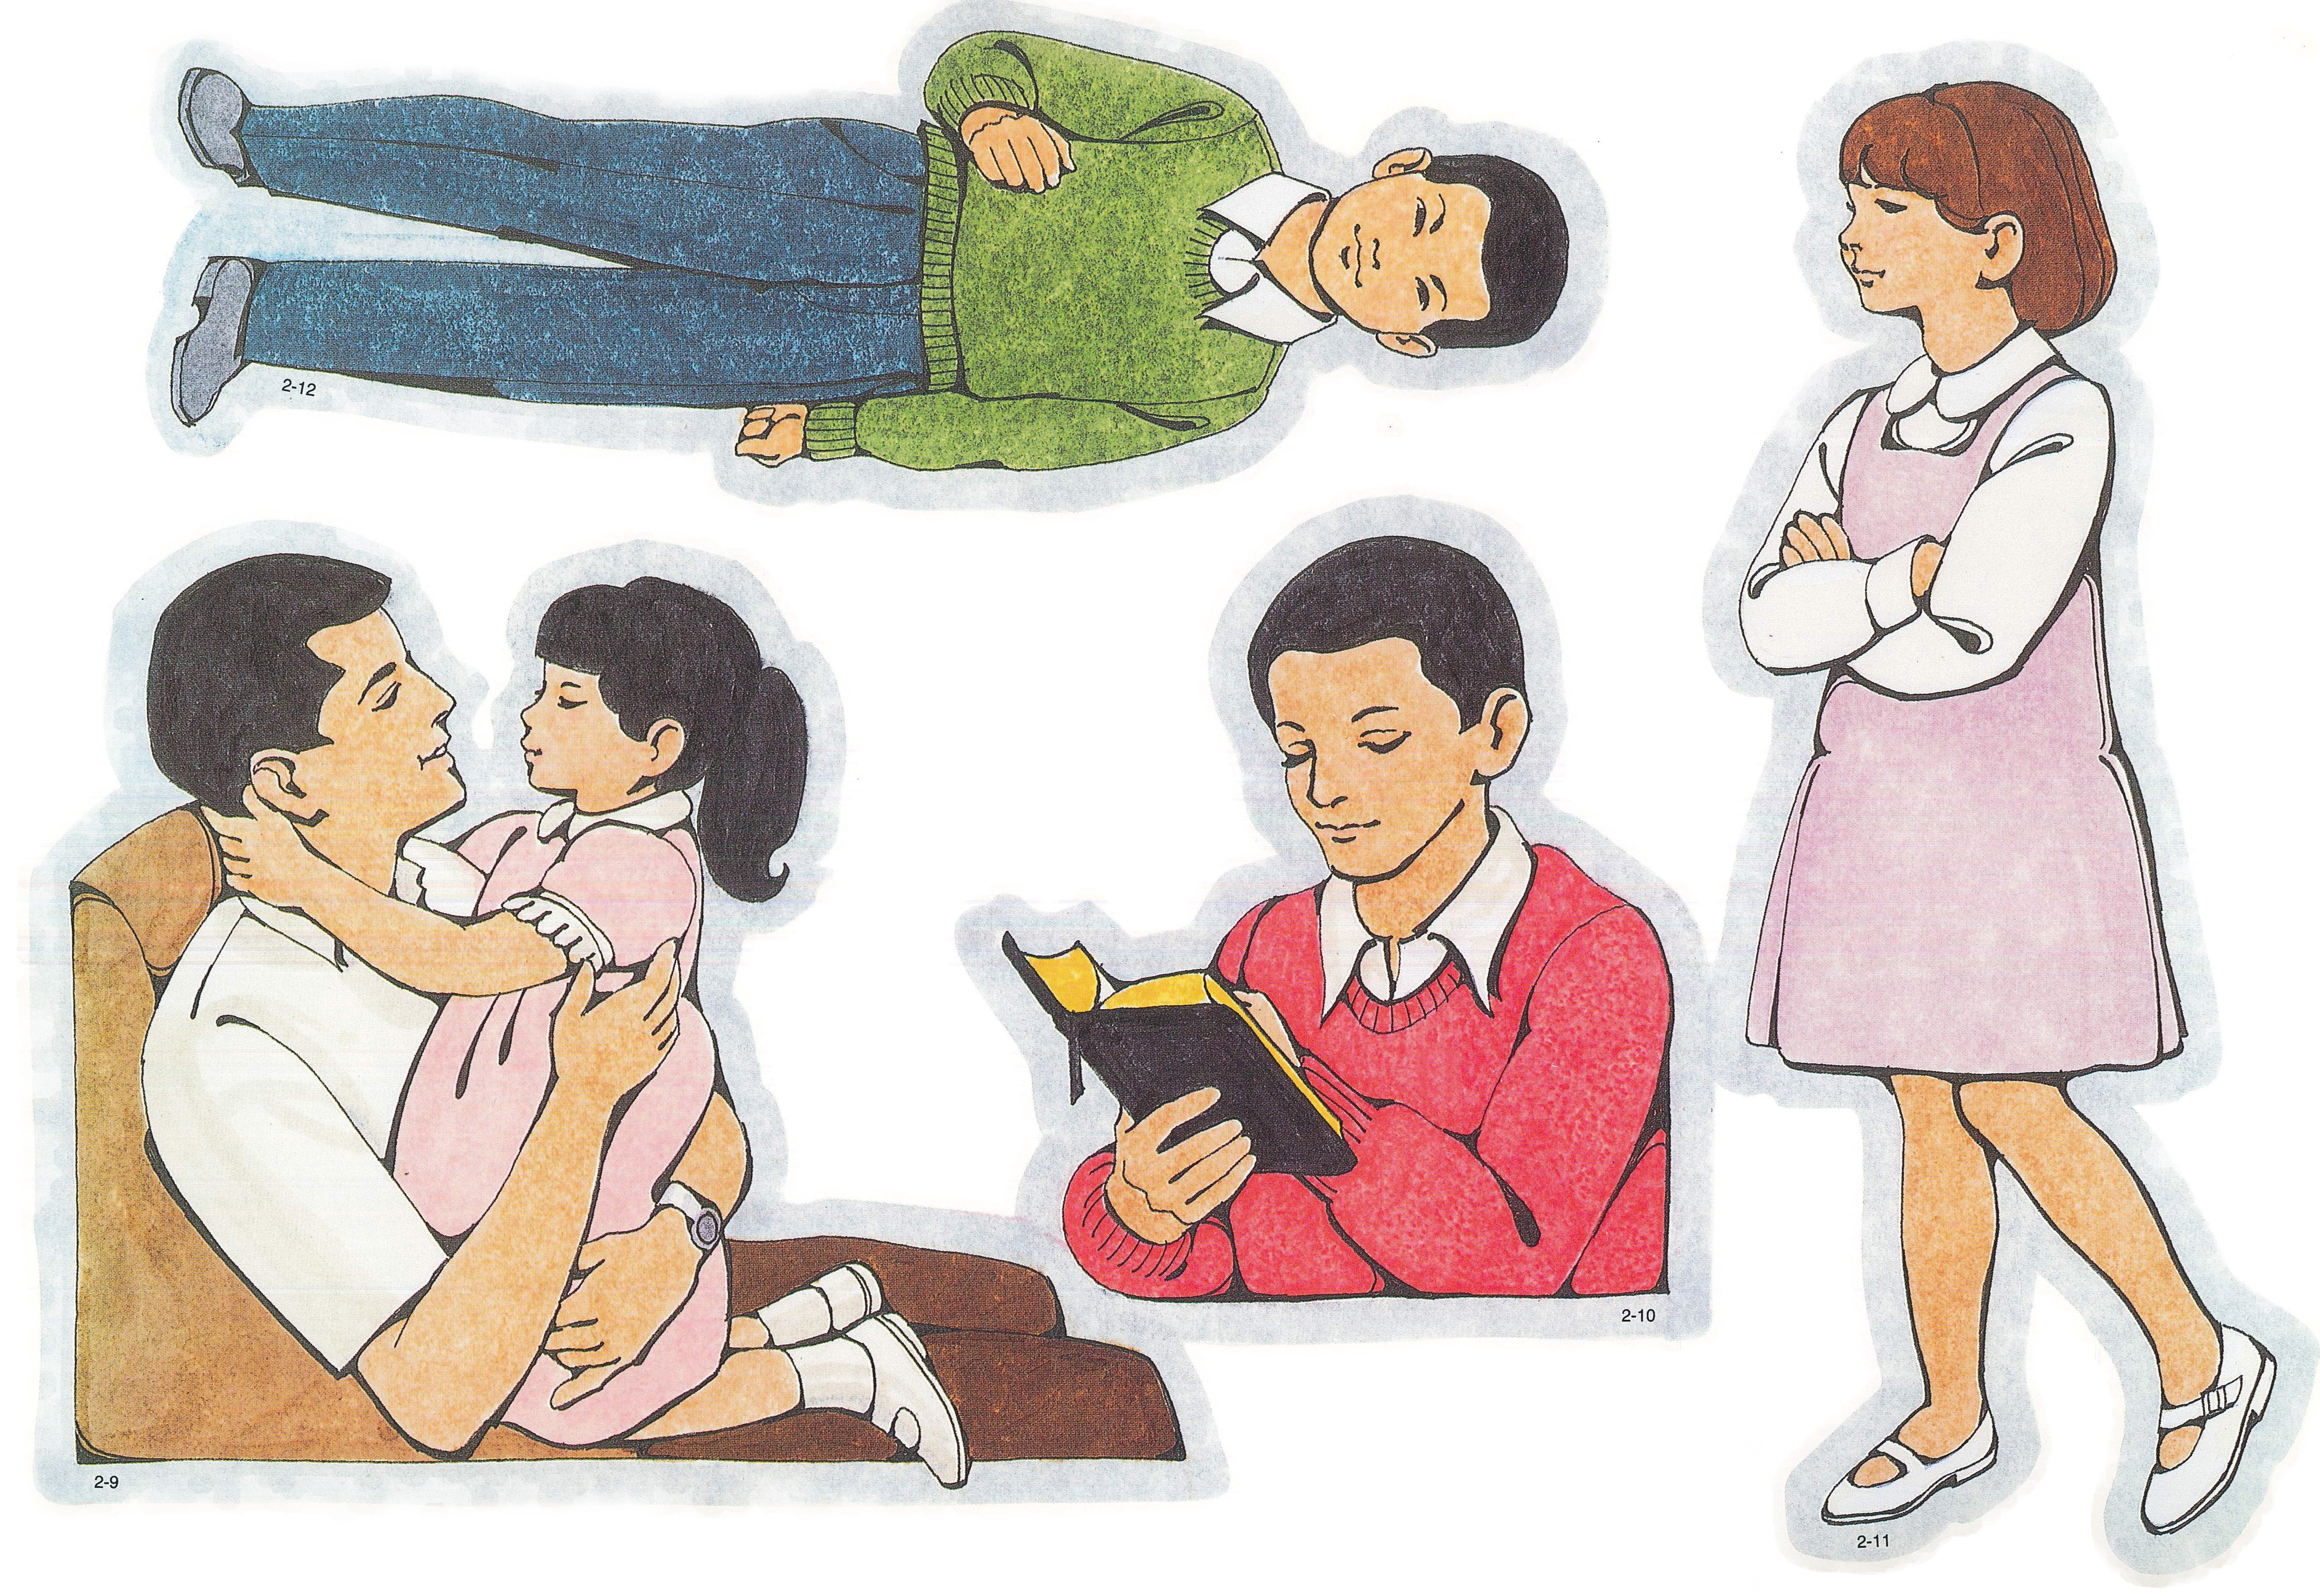 Primary cutouts of a girl hugging her father, a boy reading scriptures, a girl walking reverently with folded arms, and an Asian Primary boy.